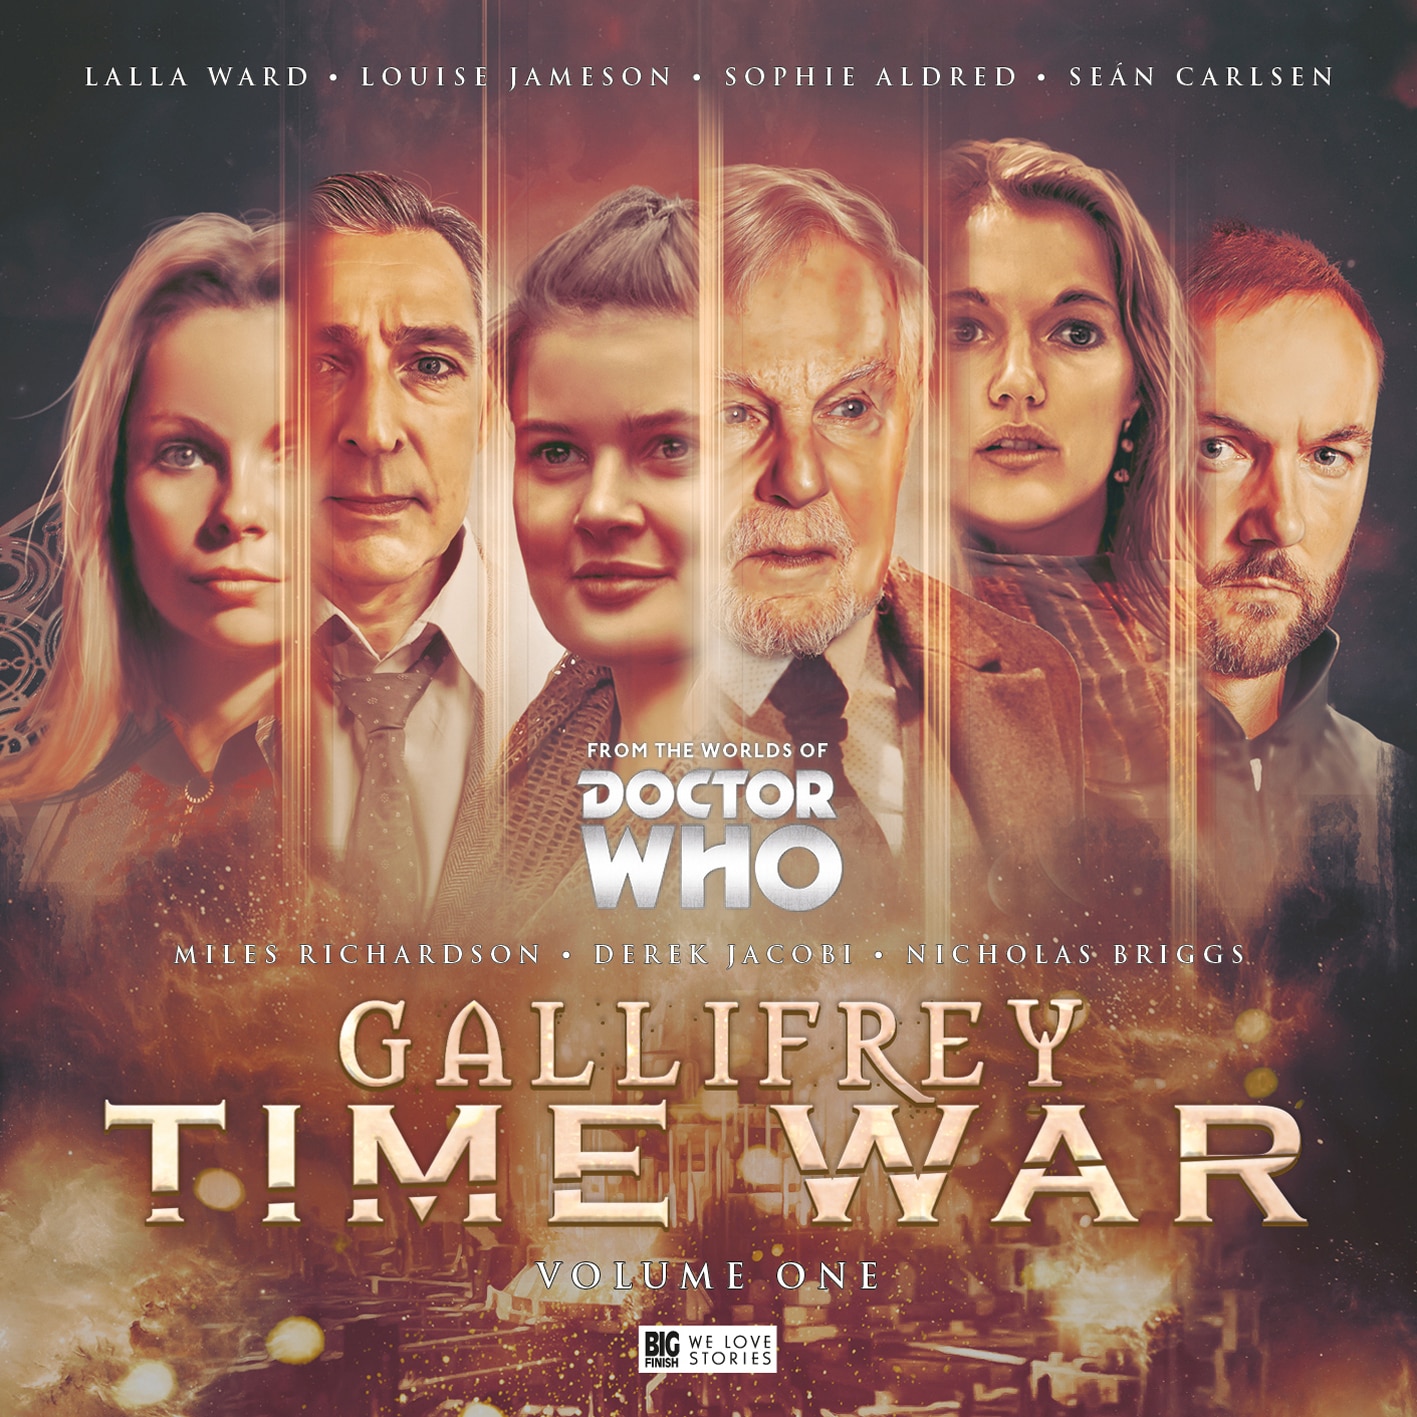 Image of Time War cast side by side